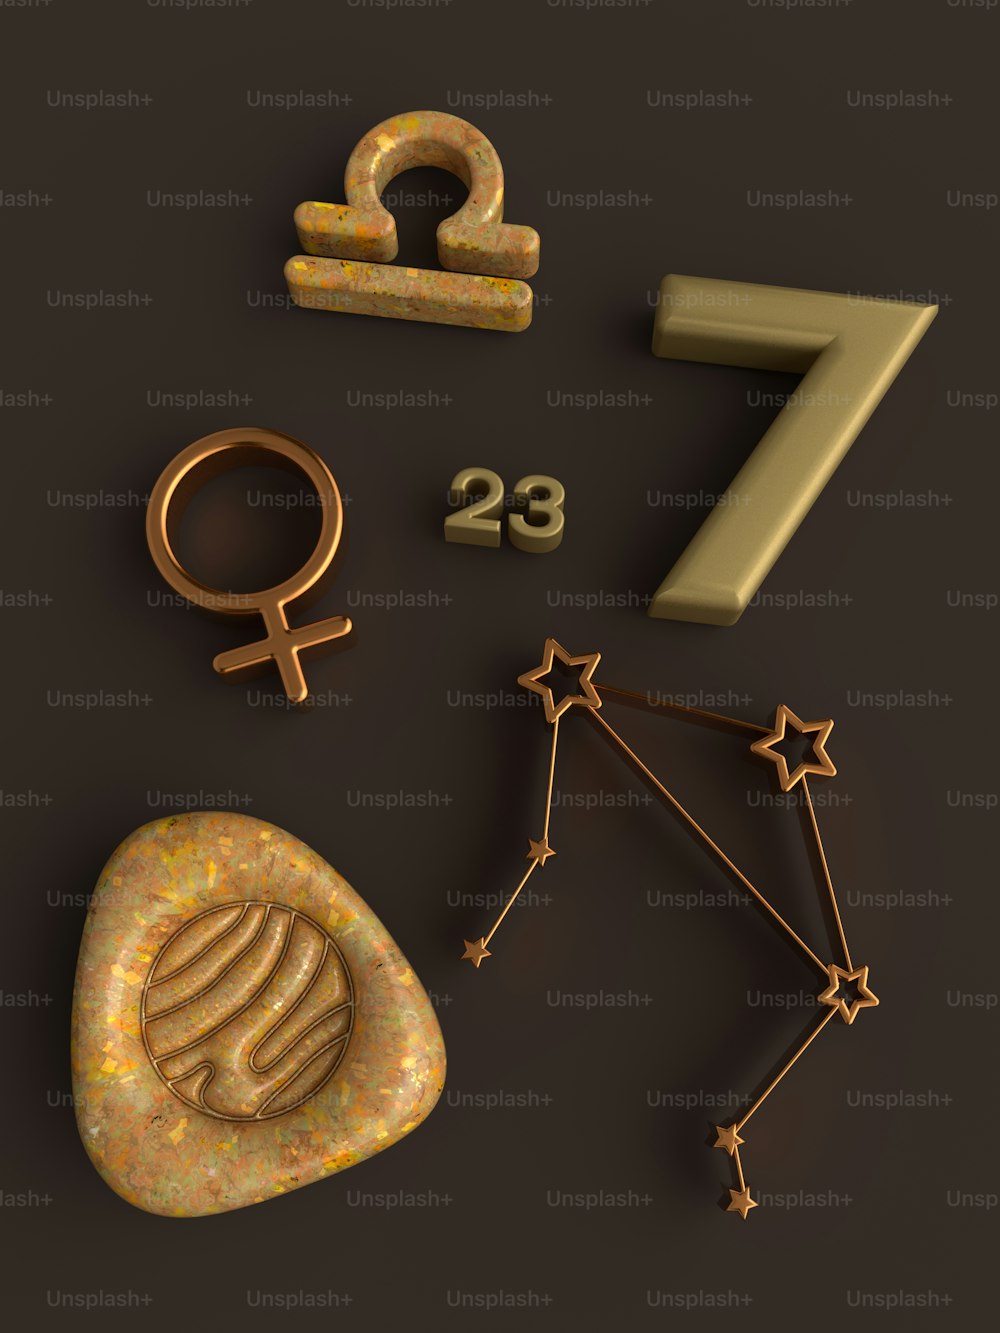 a number of astrological symbols are shown